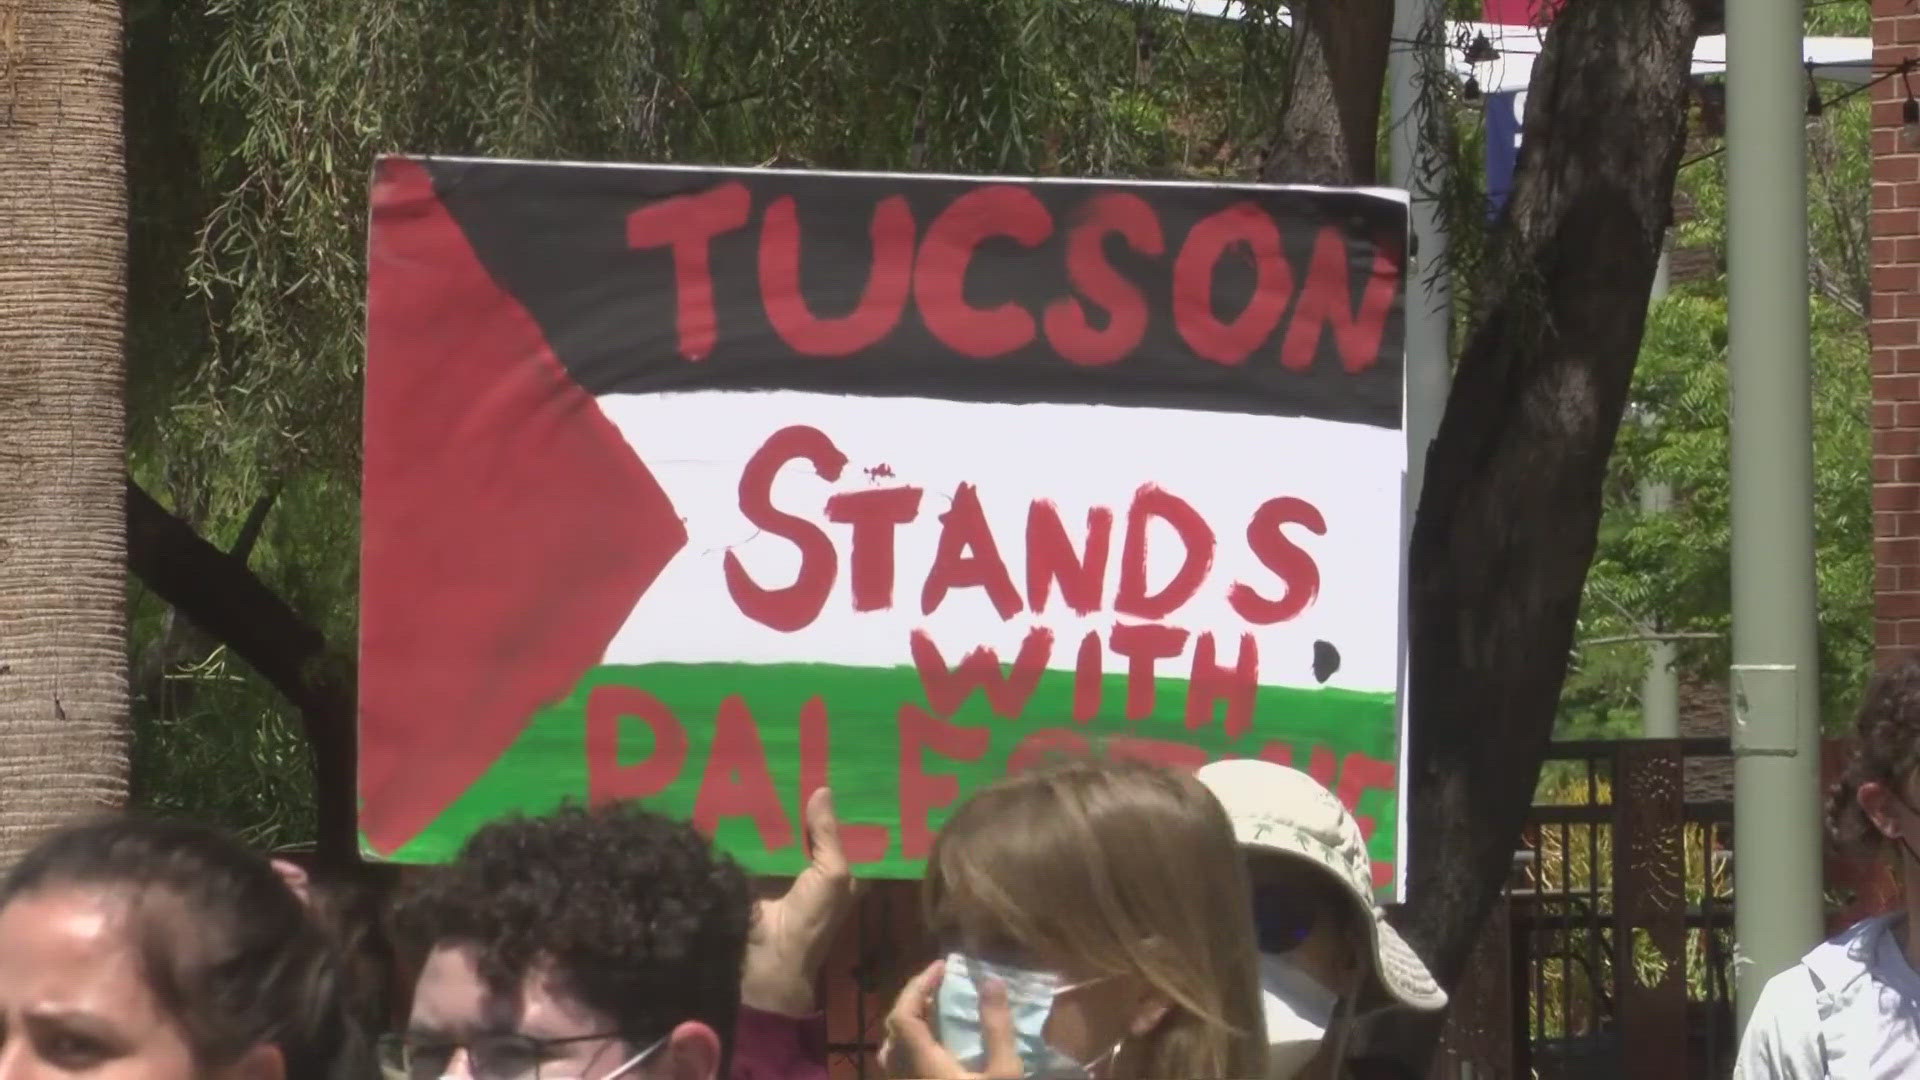 Another demonstration today in Tucson on Monday was sparked in an effort to protest U.S. funding Israel in their attacks against Palestine.